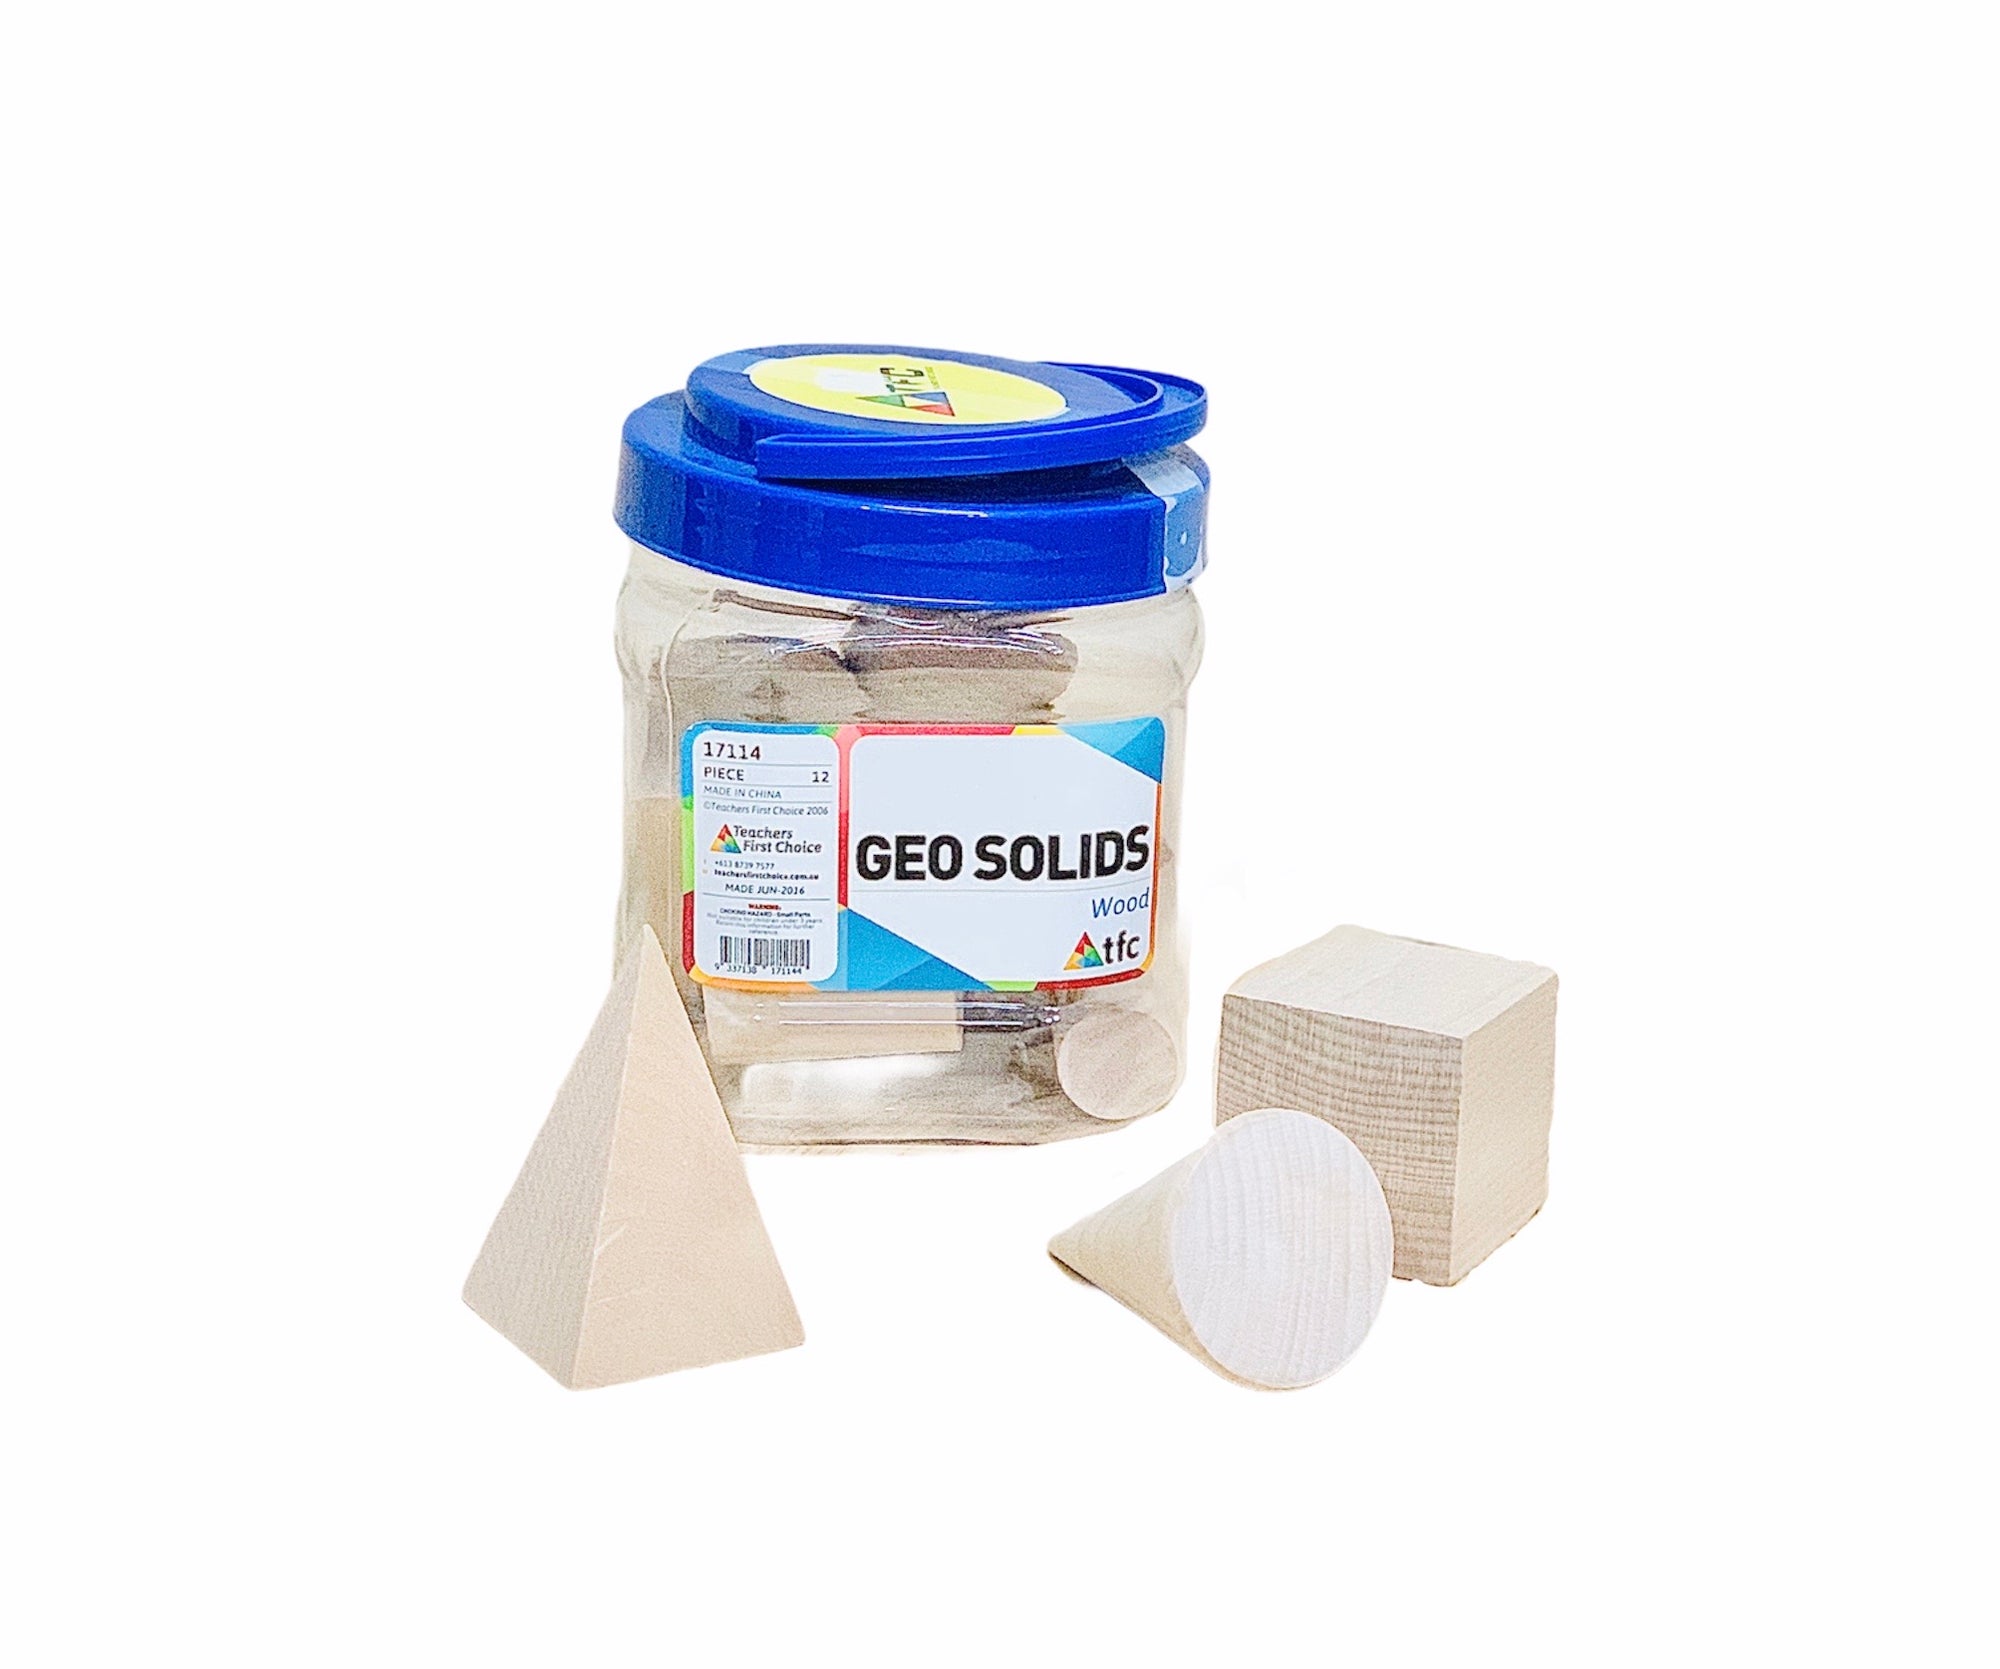 Wooden Geo Solids case with three blocks in front